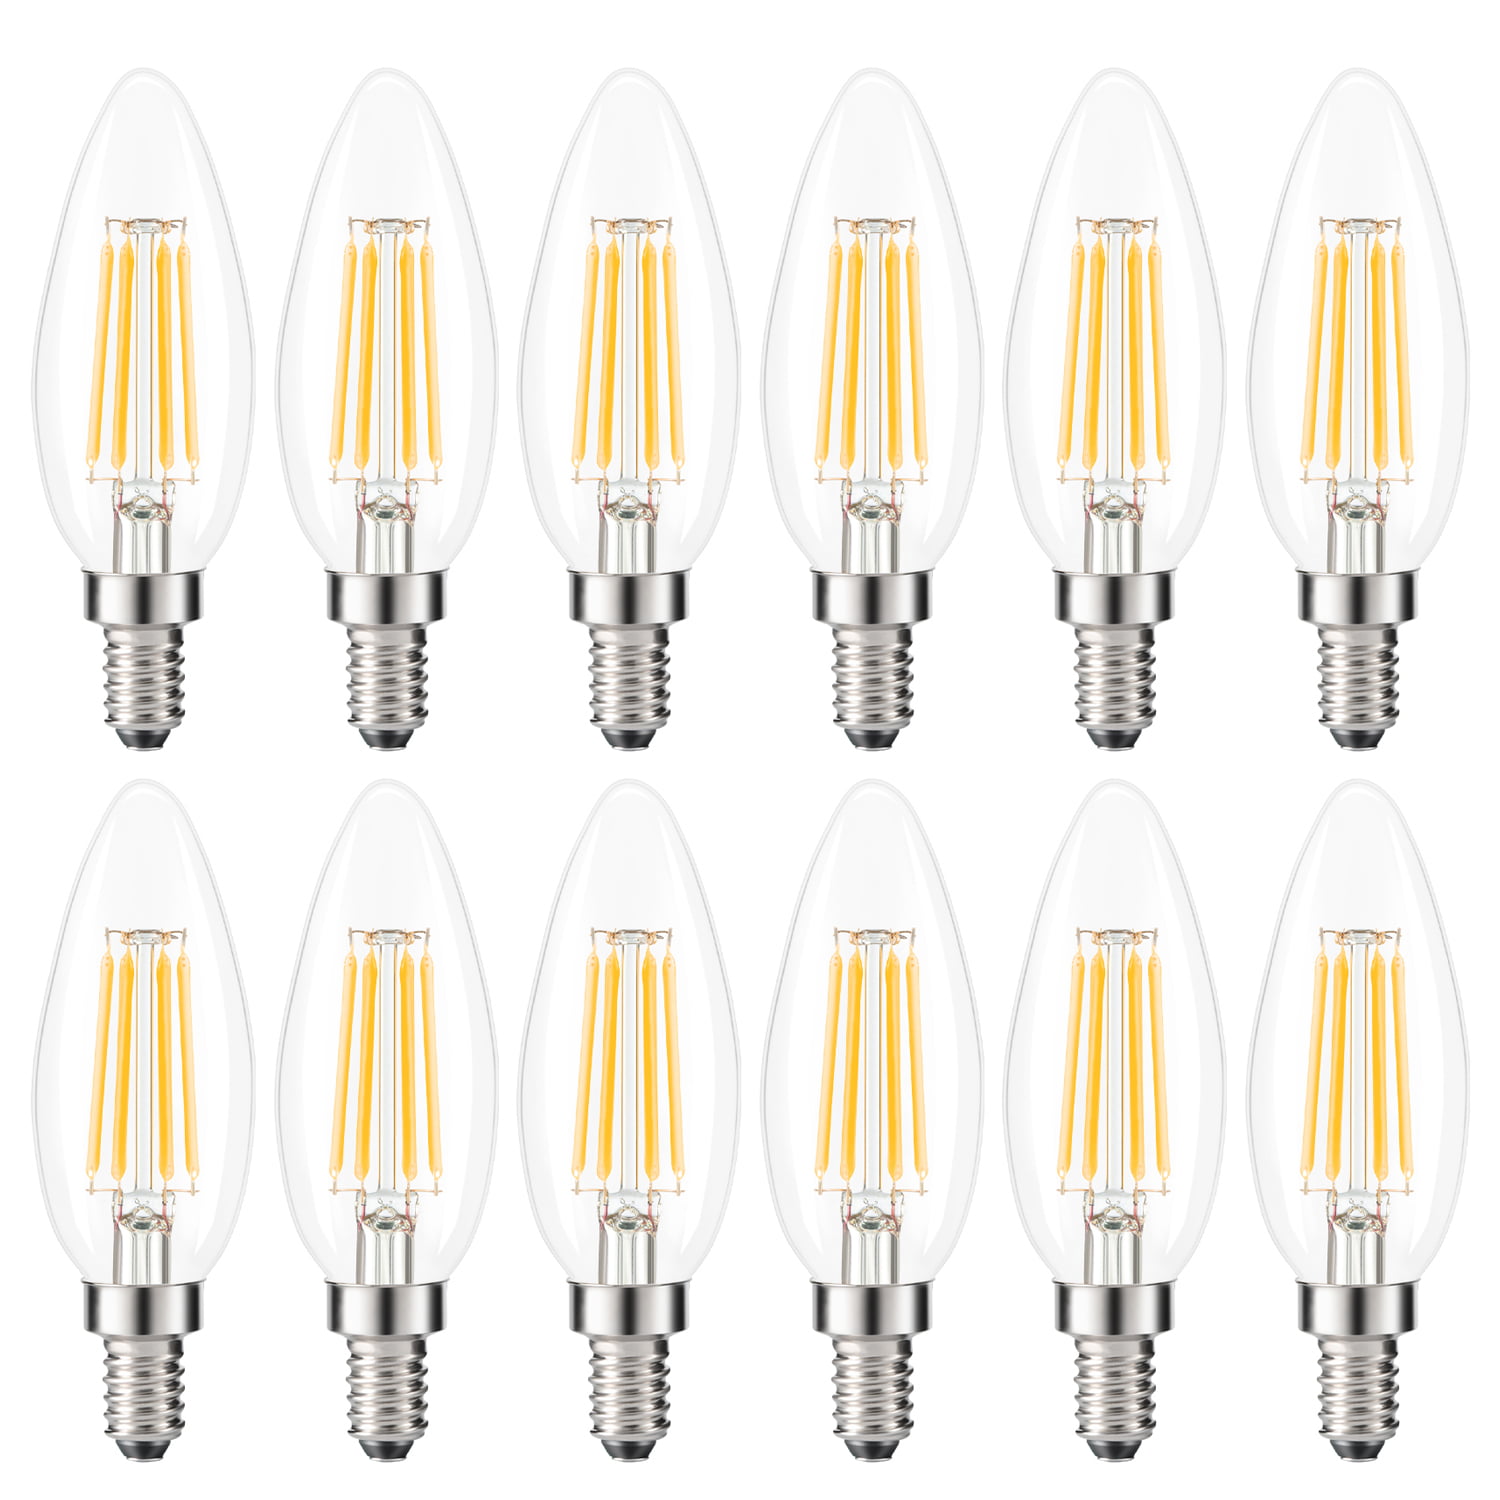 Enclosed Fixture Rated Dimmable E12 40W 12x MaxLite LED Chandelier Bulbs 4W 